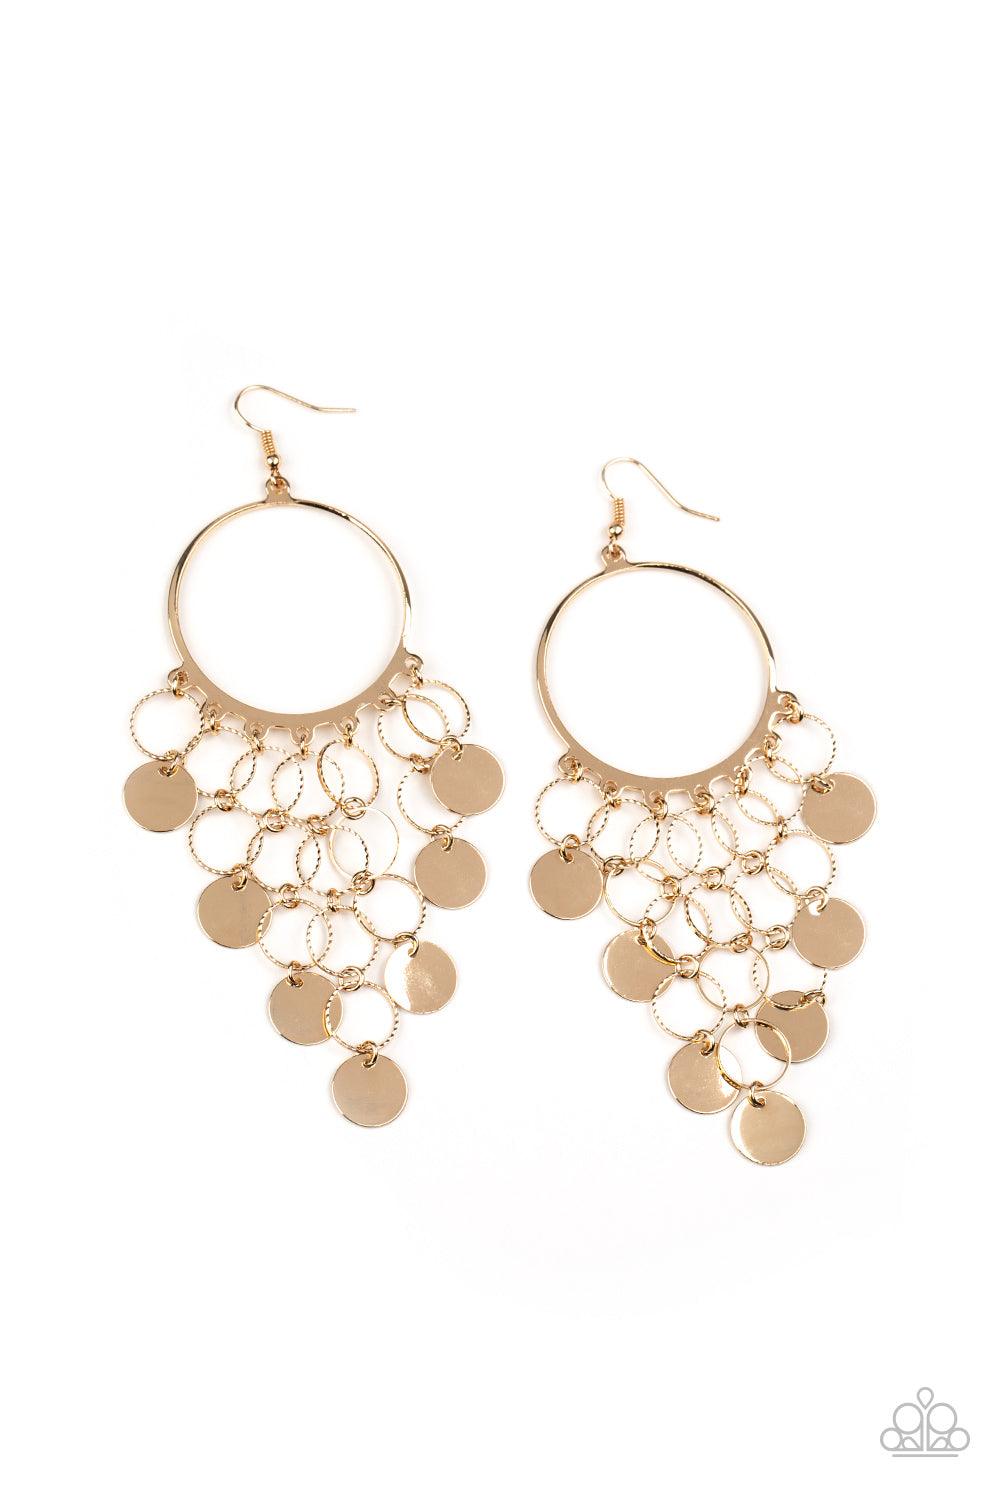 Paparazzi Accessories Take a CHIME Out - Gold Chains of textured gold hoops and flat gold discs cascade from the bottom of a glistening gold hoop, creating a timelessly tapered fringe. Earring attaches to a standard fishhook fitting. Sold as one pair of e